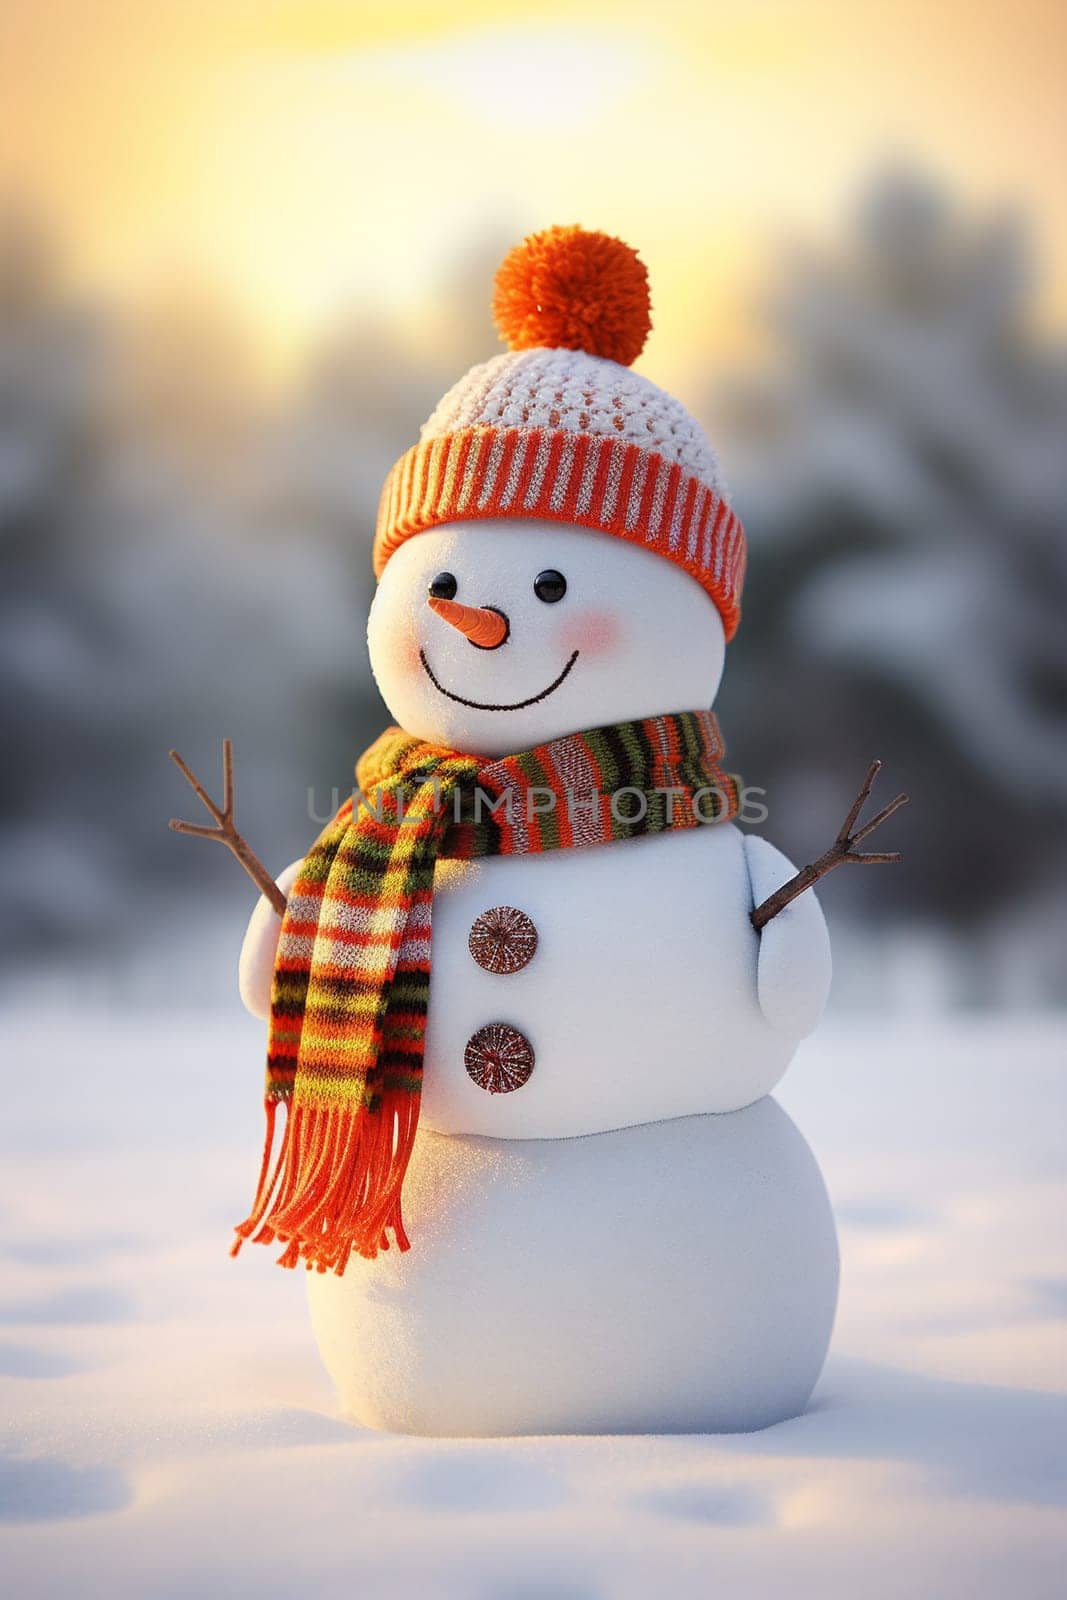 A festive snowman braves the winter chill, adorned with a cozy hat and scarf, spreading Christmas holiday cheer in the frosty outdoor wonderland